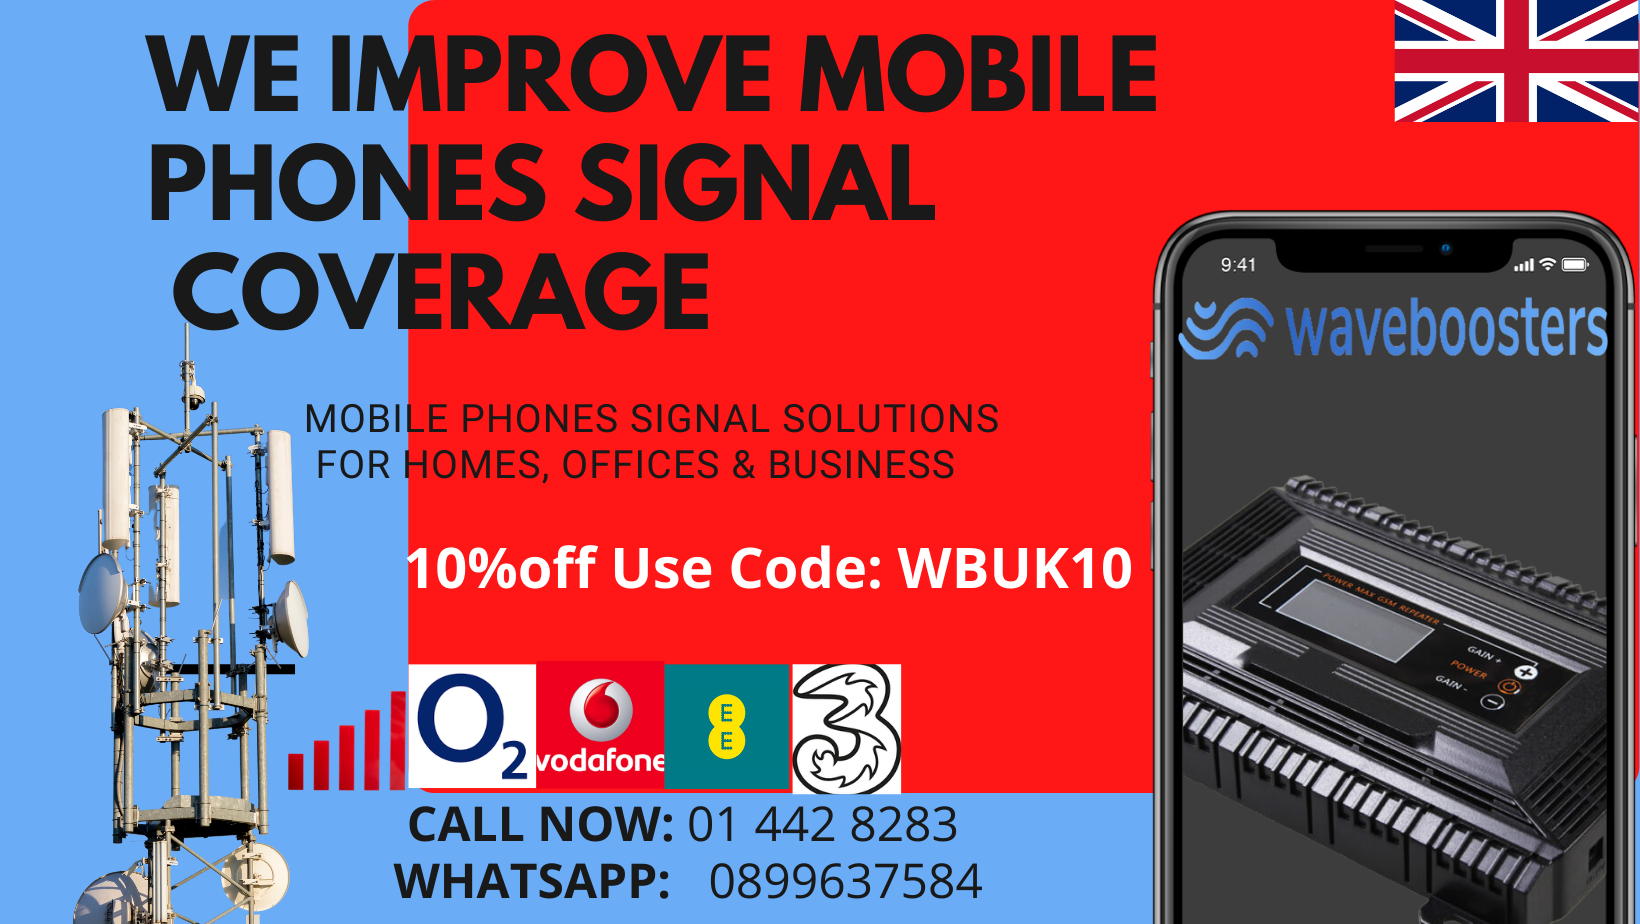 Mobile phone signal boosters